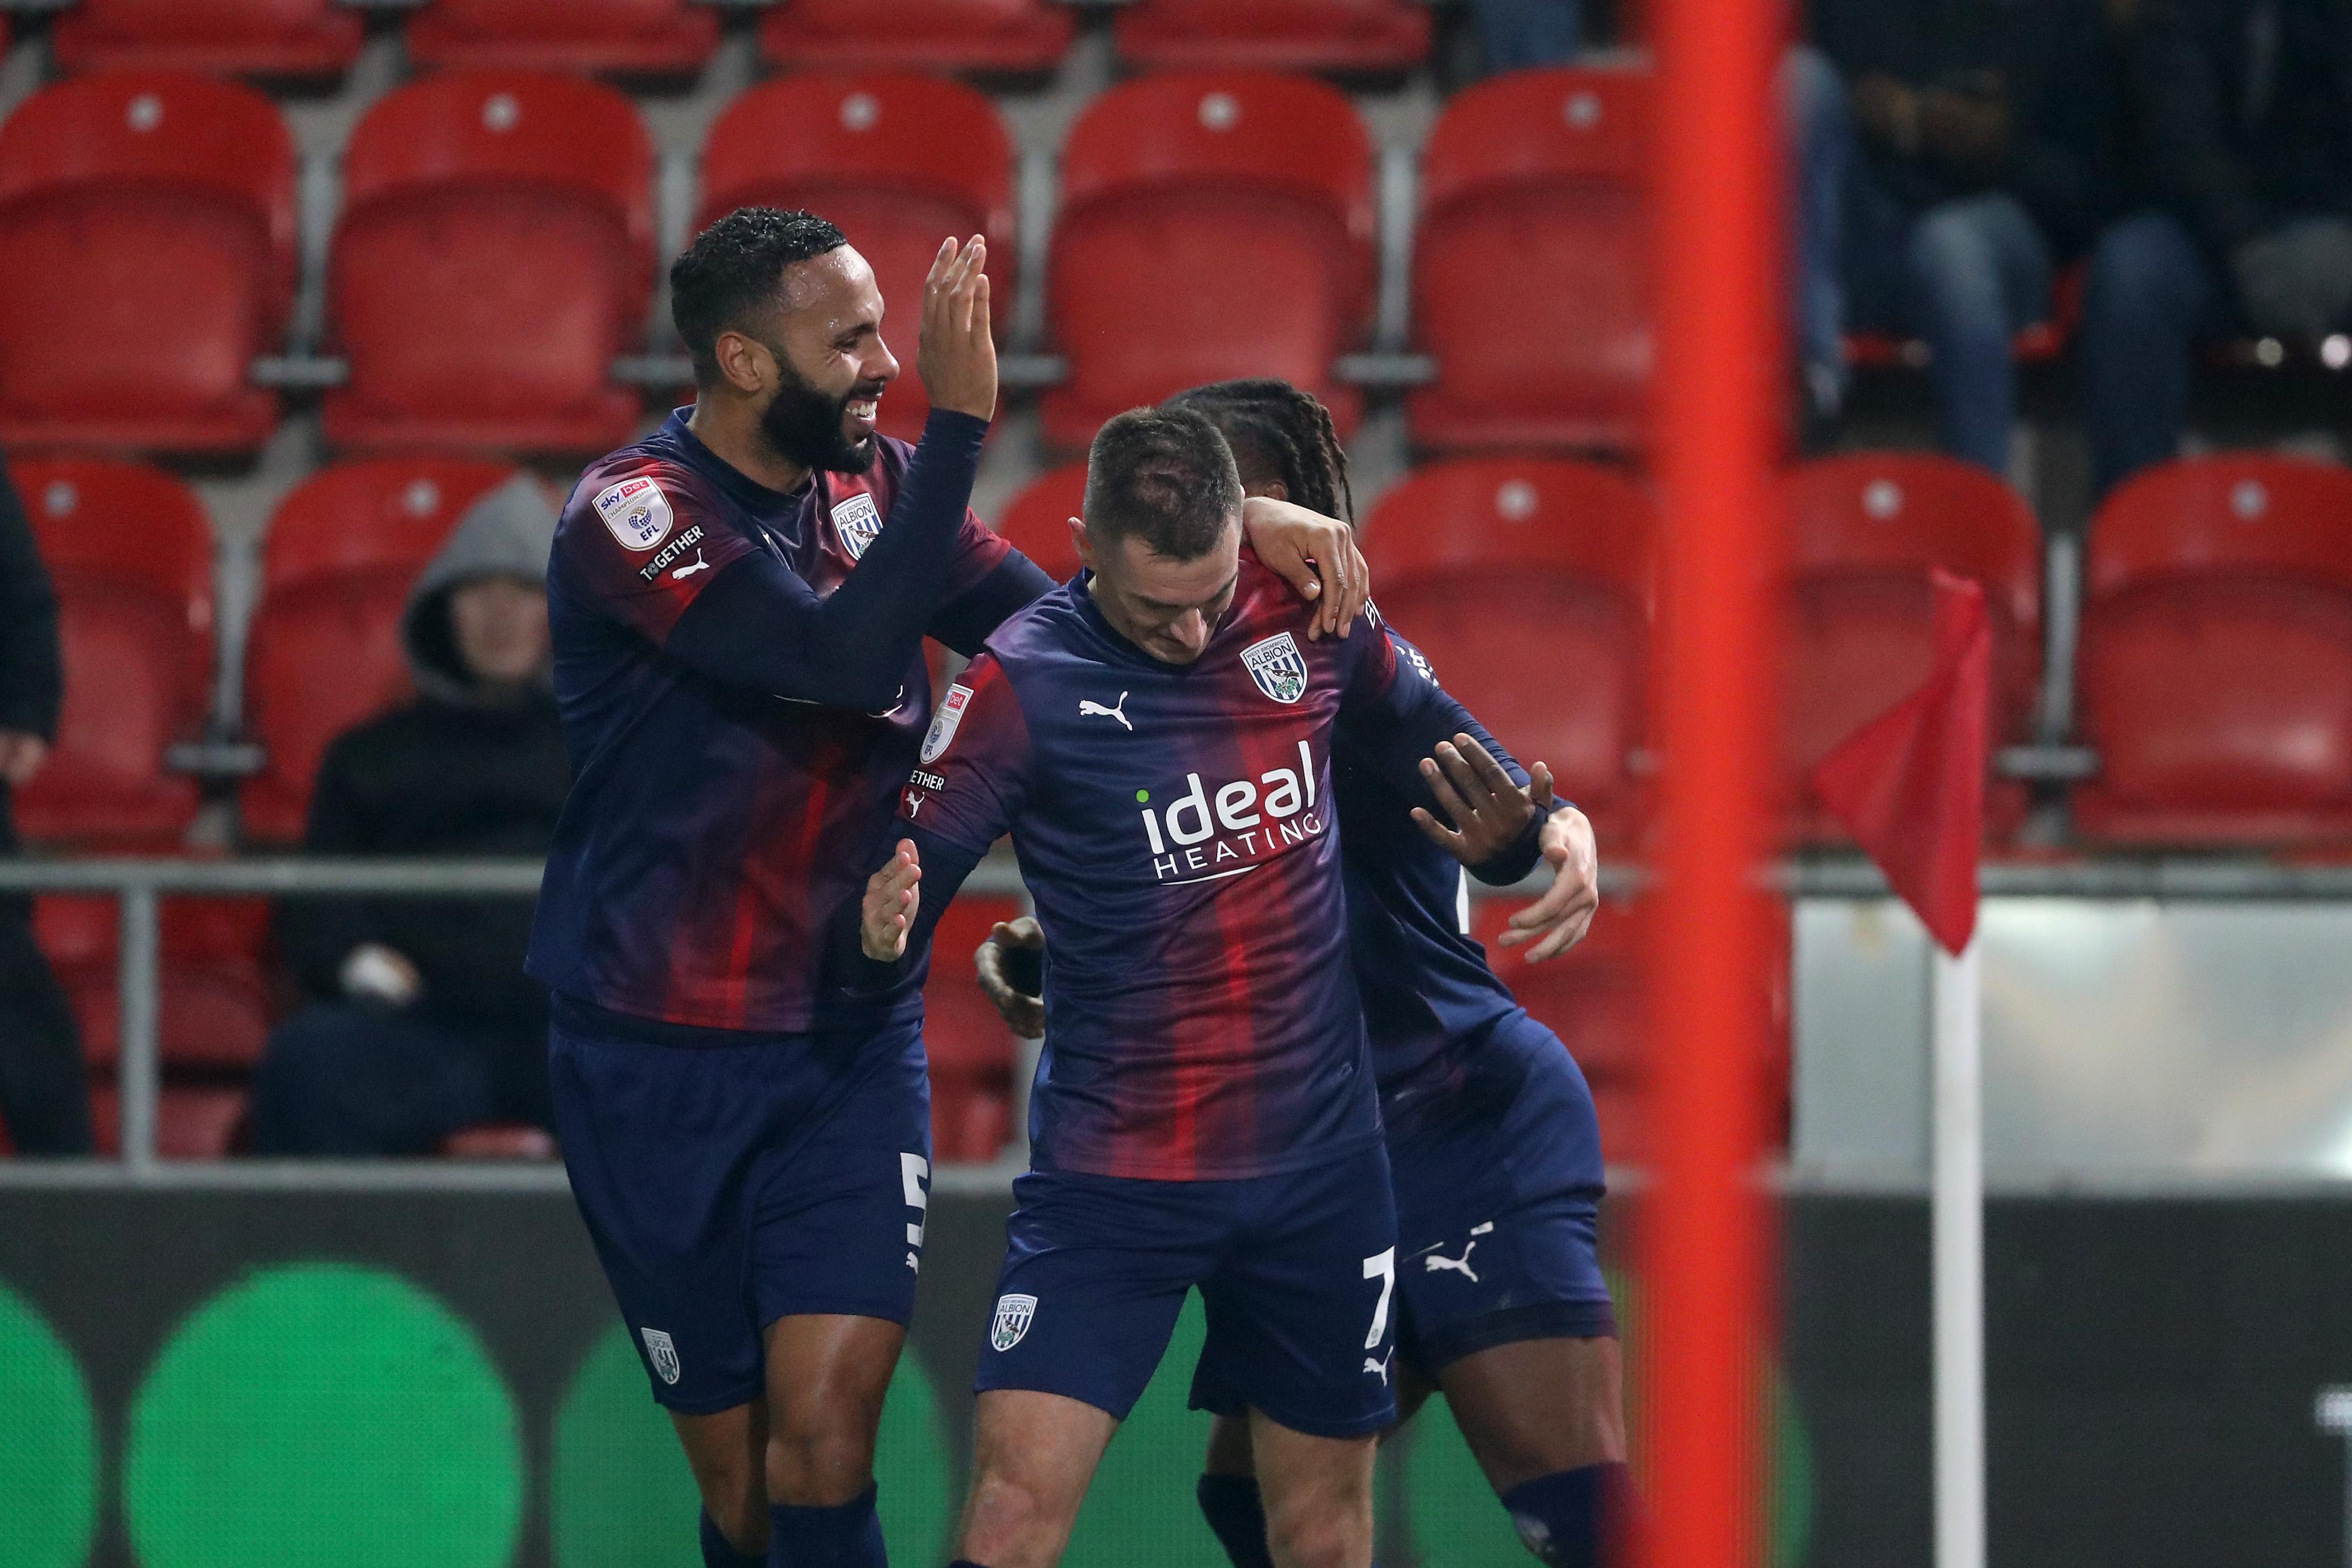 Jed Wallace celebrates scoring against Rotherham in the navy blue and red kit with Kyle Bartley